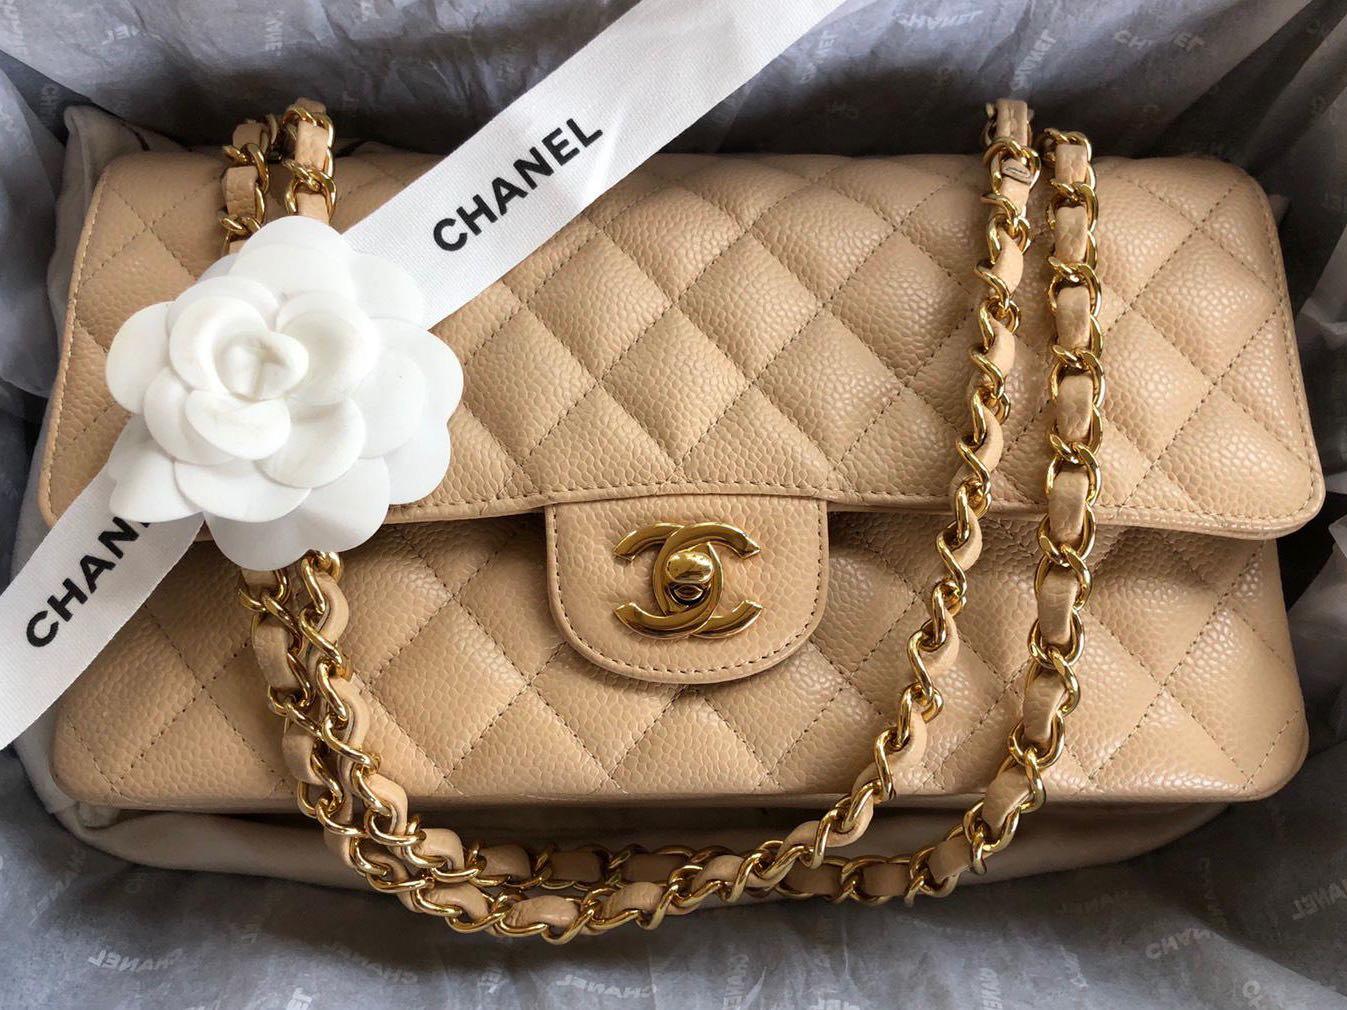 CHANEL, Bags, Chanel Classic Medium Flap Bag In Beige Clair Caviar With  Silver Hardware